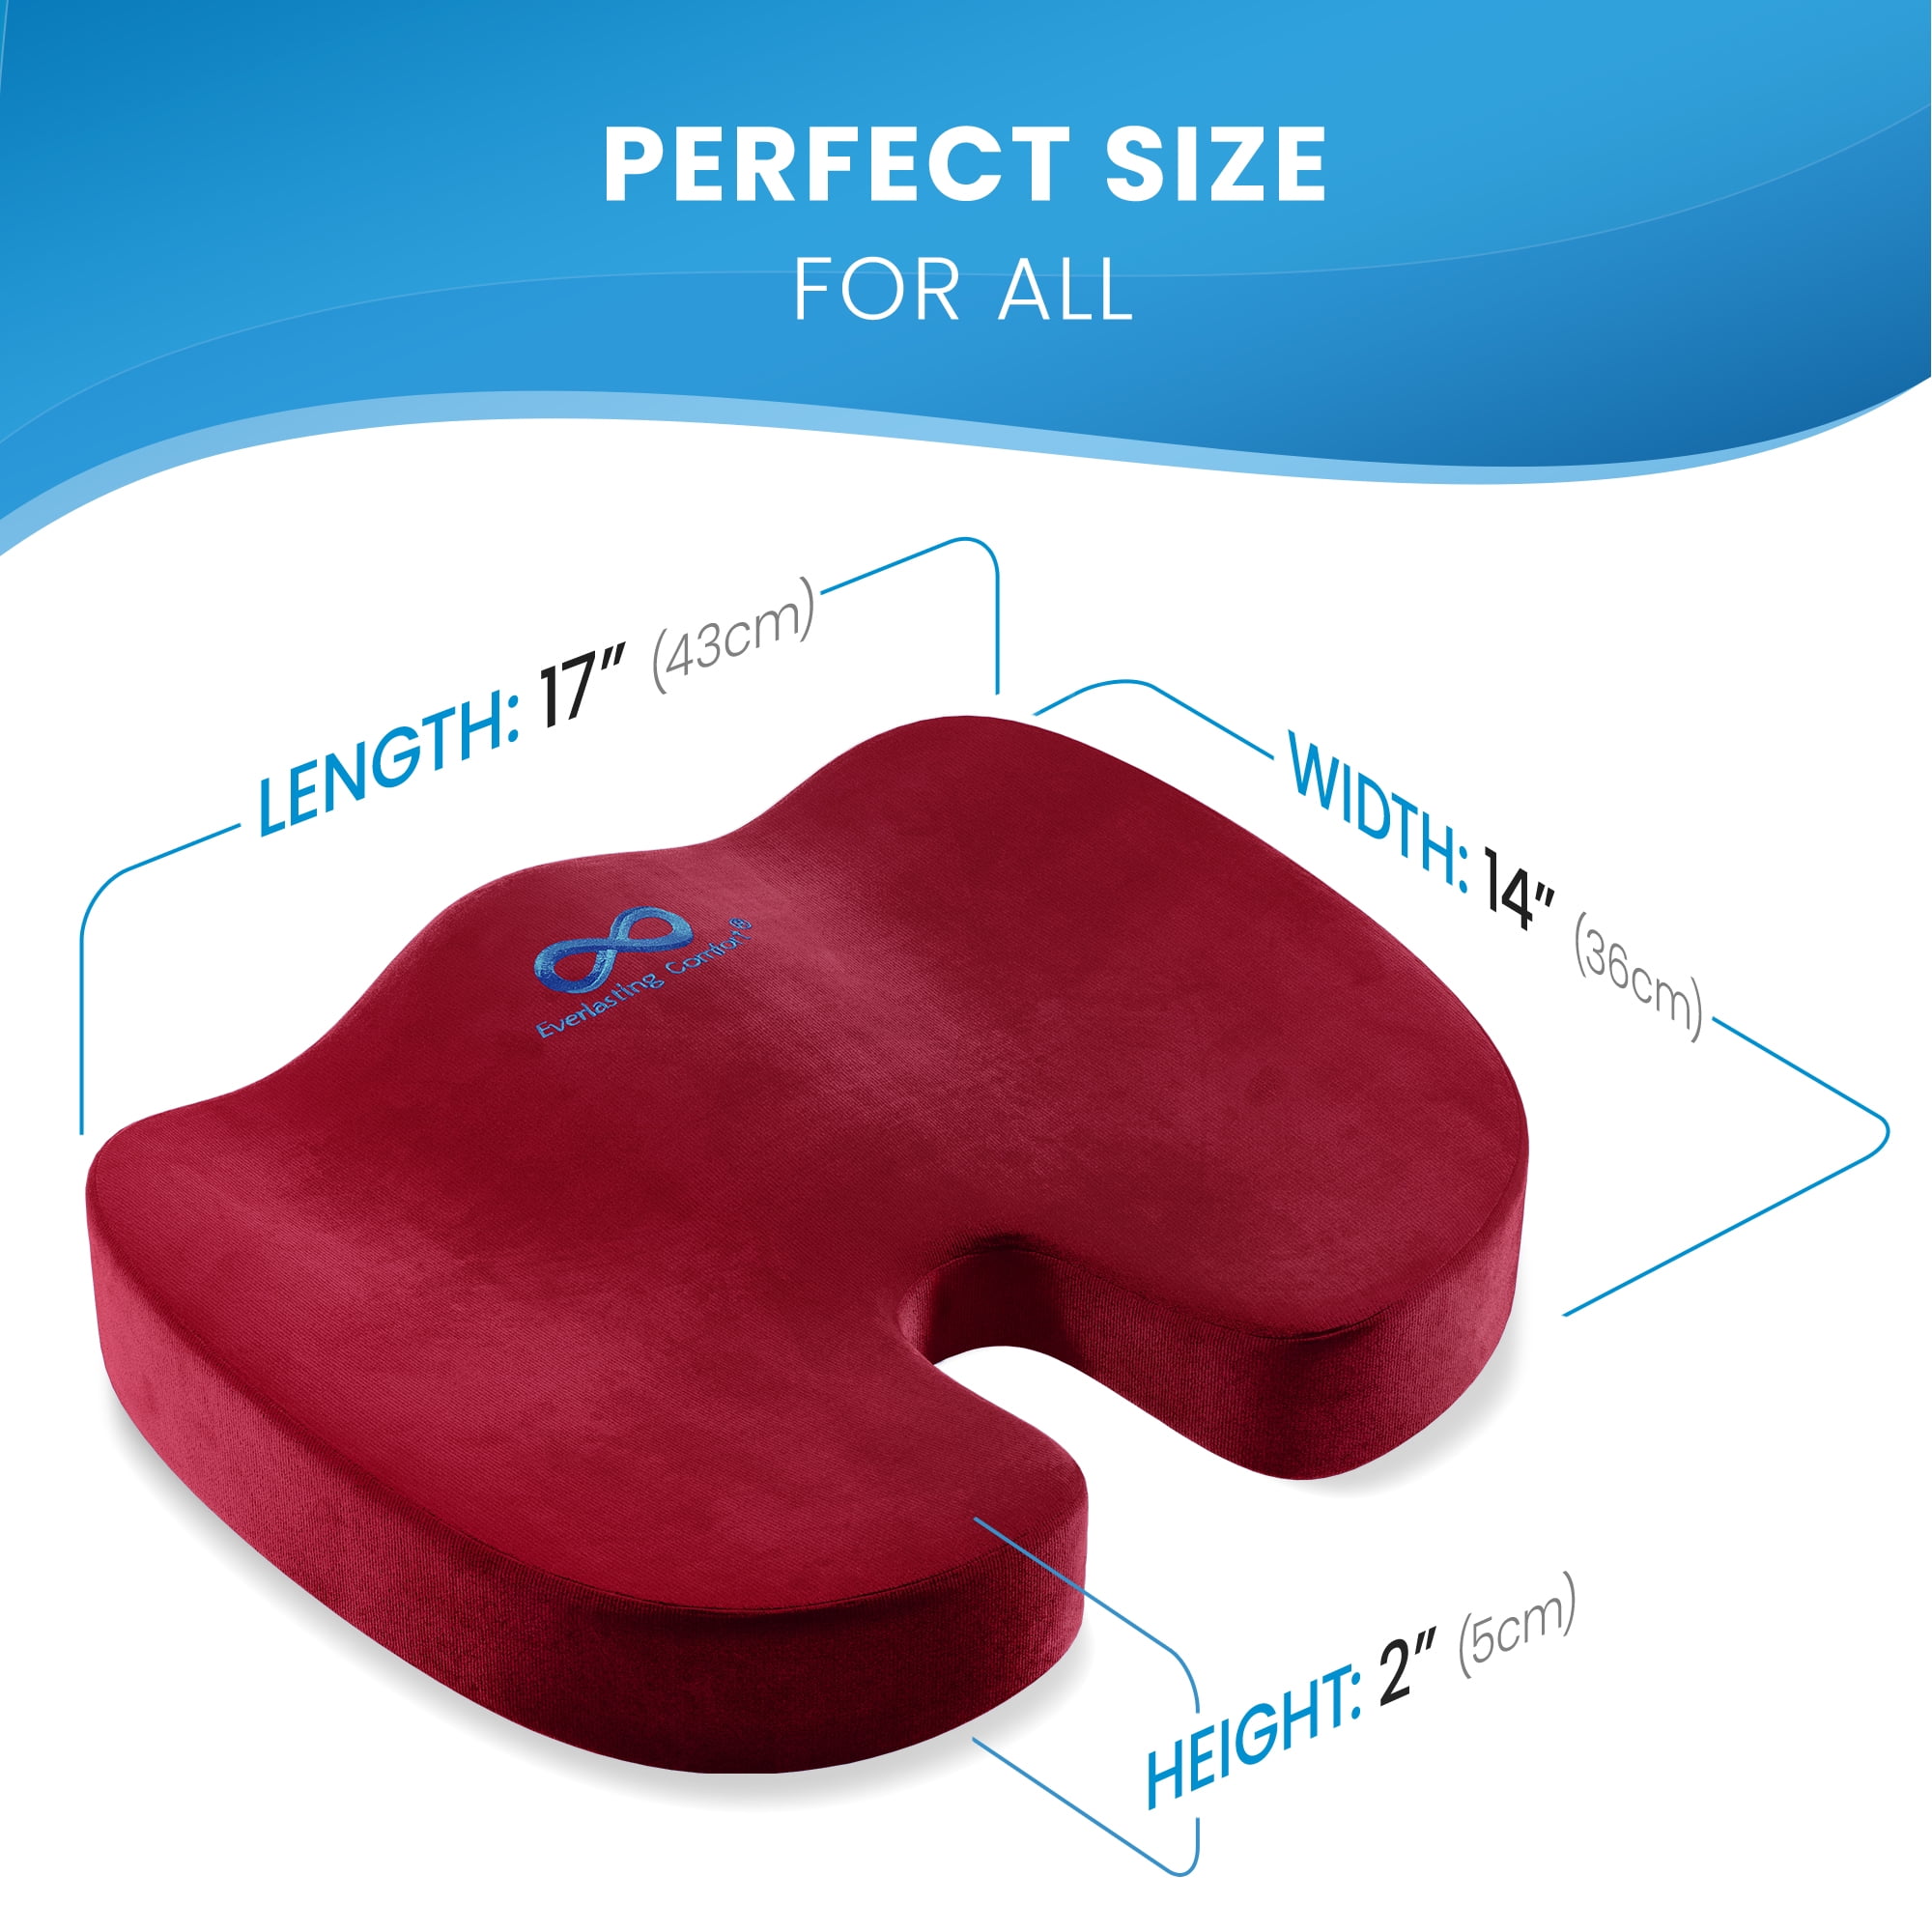 Everlasting Comfort Seat Cushion Pillow for Office Chair - Sit